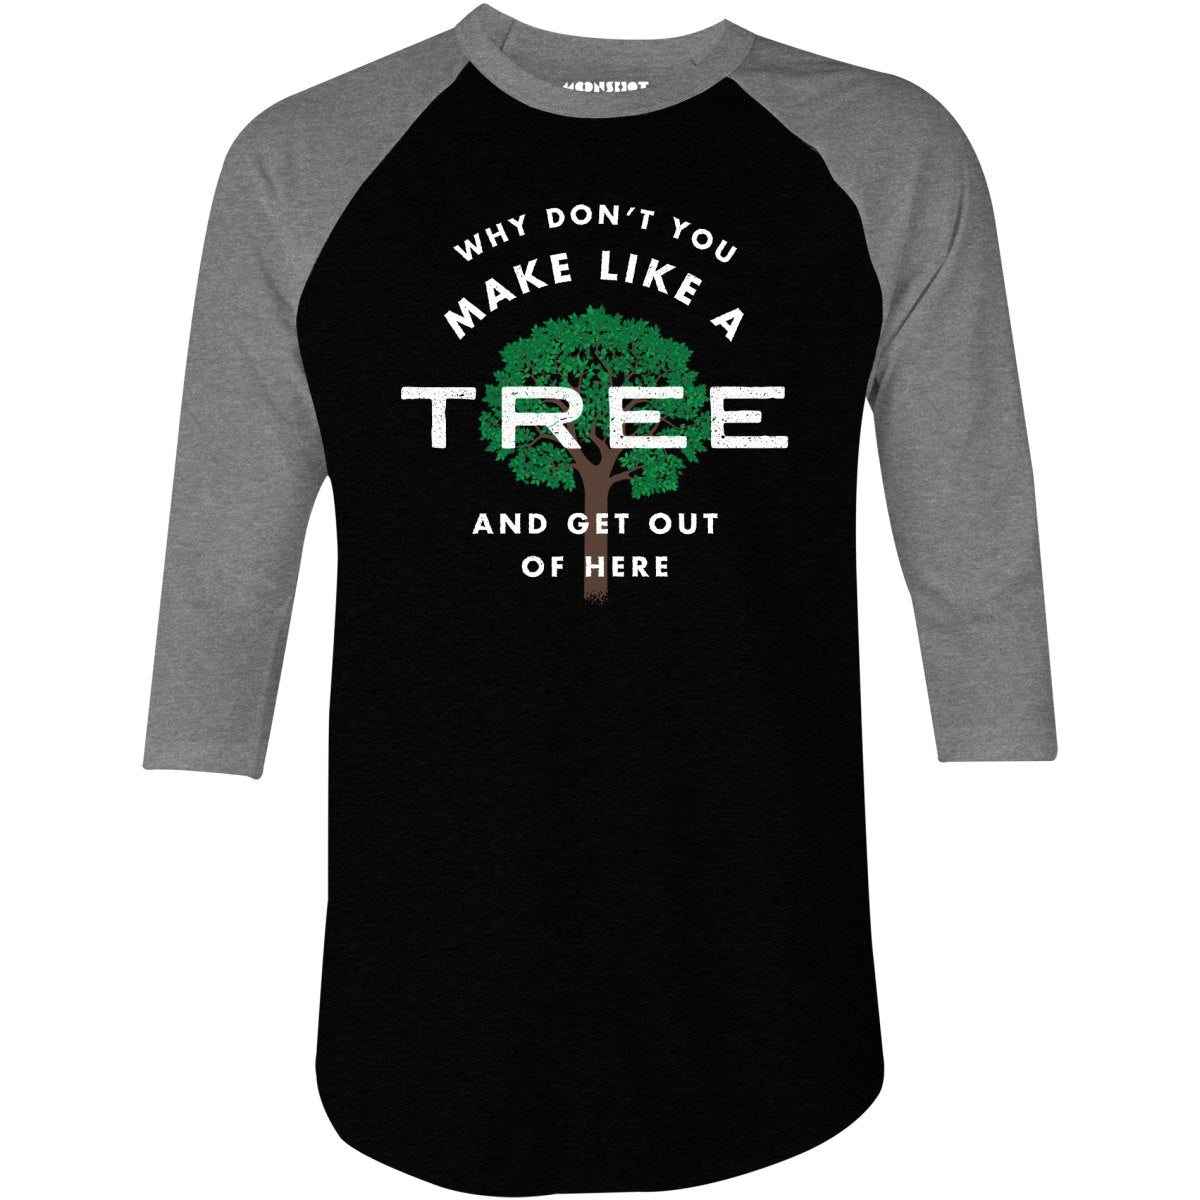 Why Don't You Make Like a Tree and Get Out of Here - 3/4 Sleeve Raglan T-Shirt